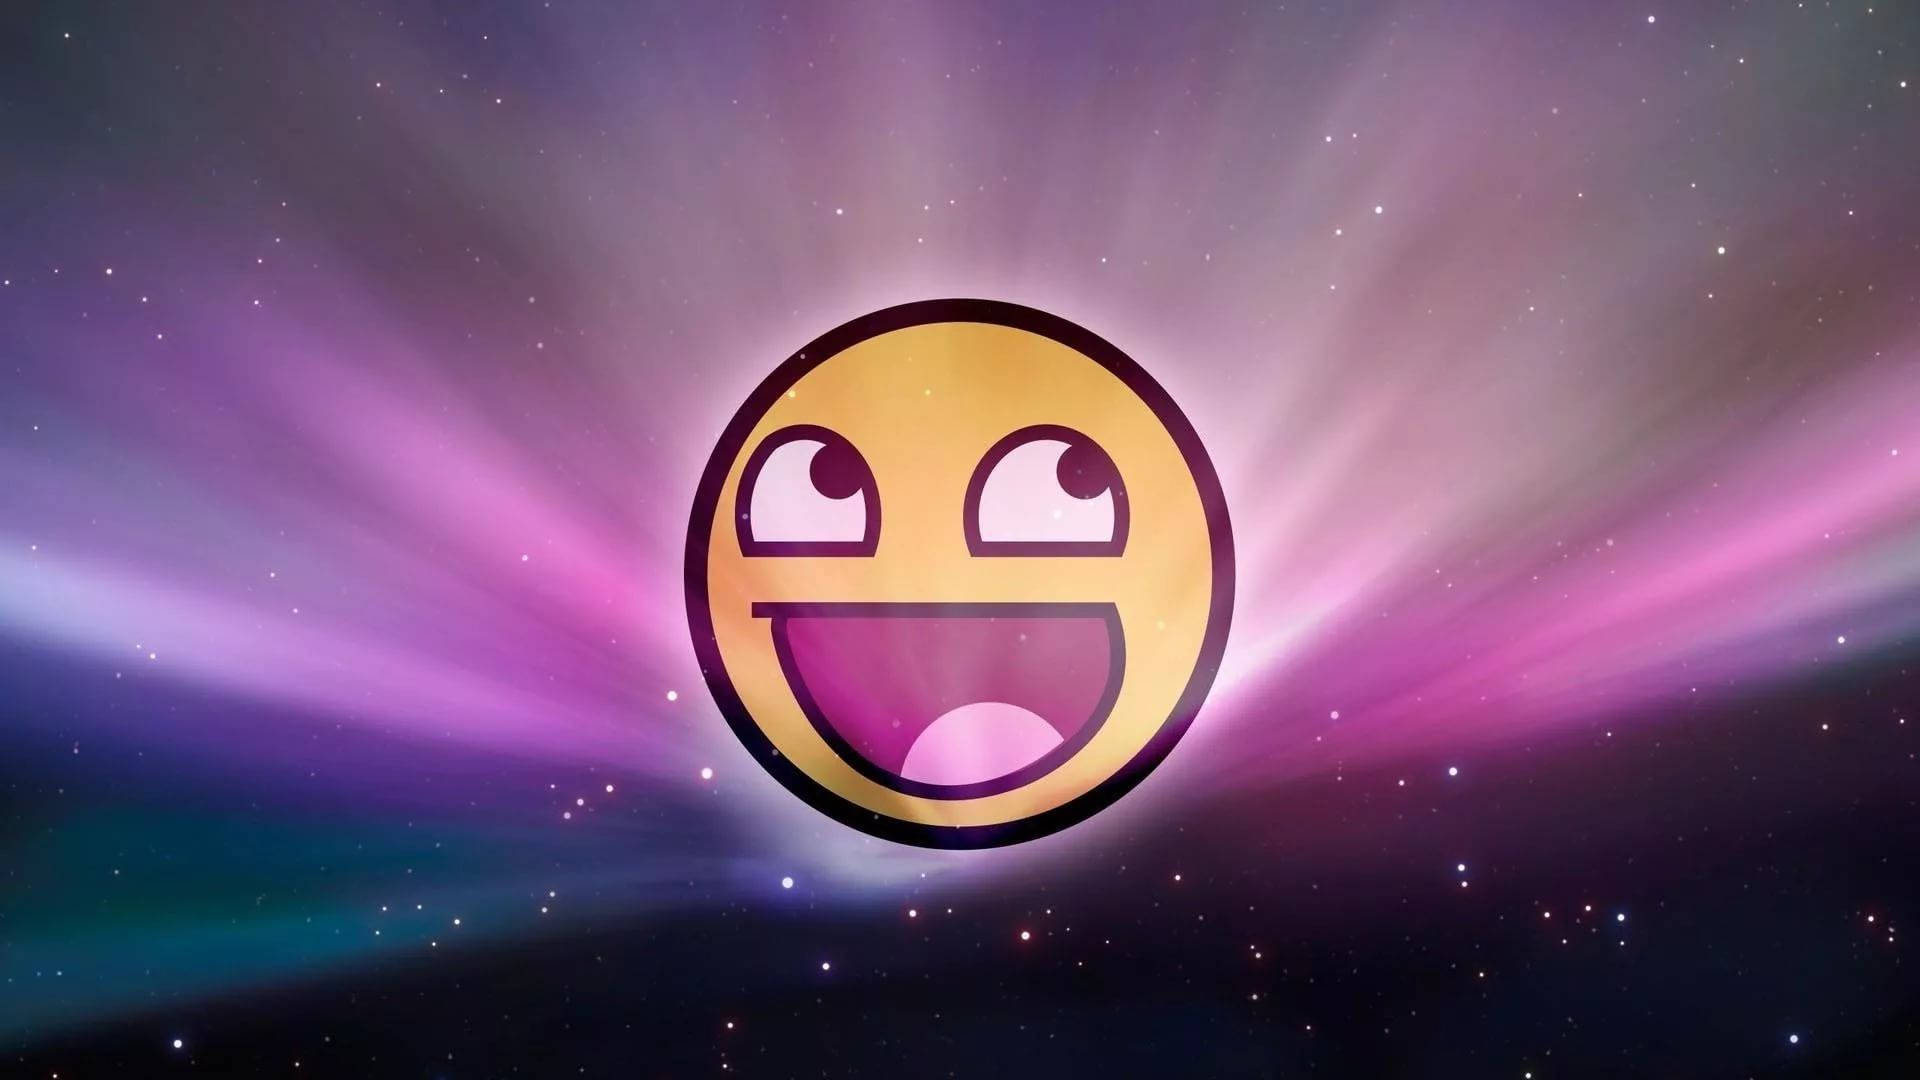 Big awesome smiley face meme on the galaxy with shining violet rays and stars.